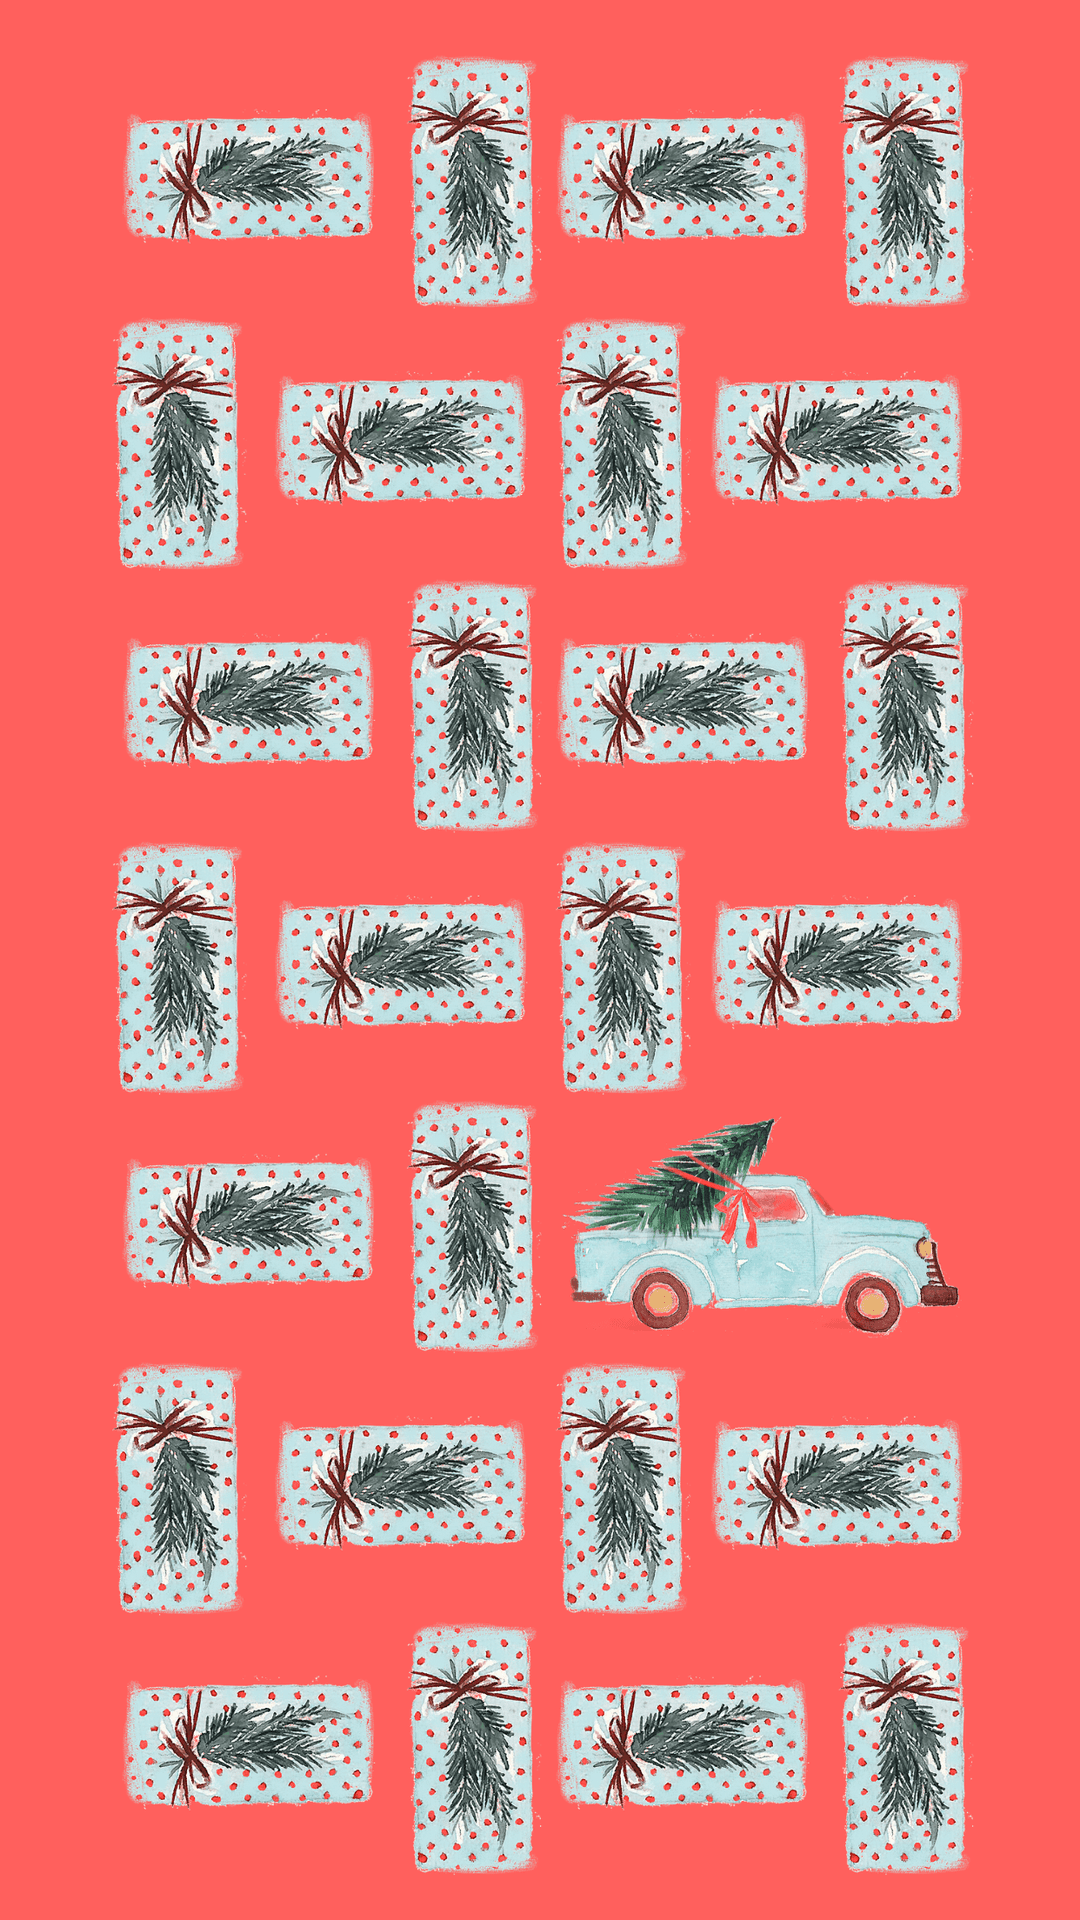 Show off your Christmas spirit in style with this festive Christmas phone background.